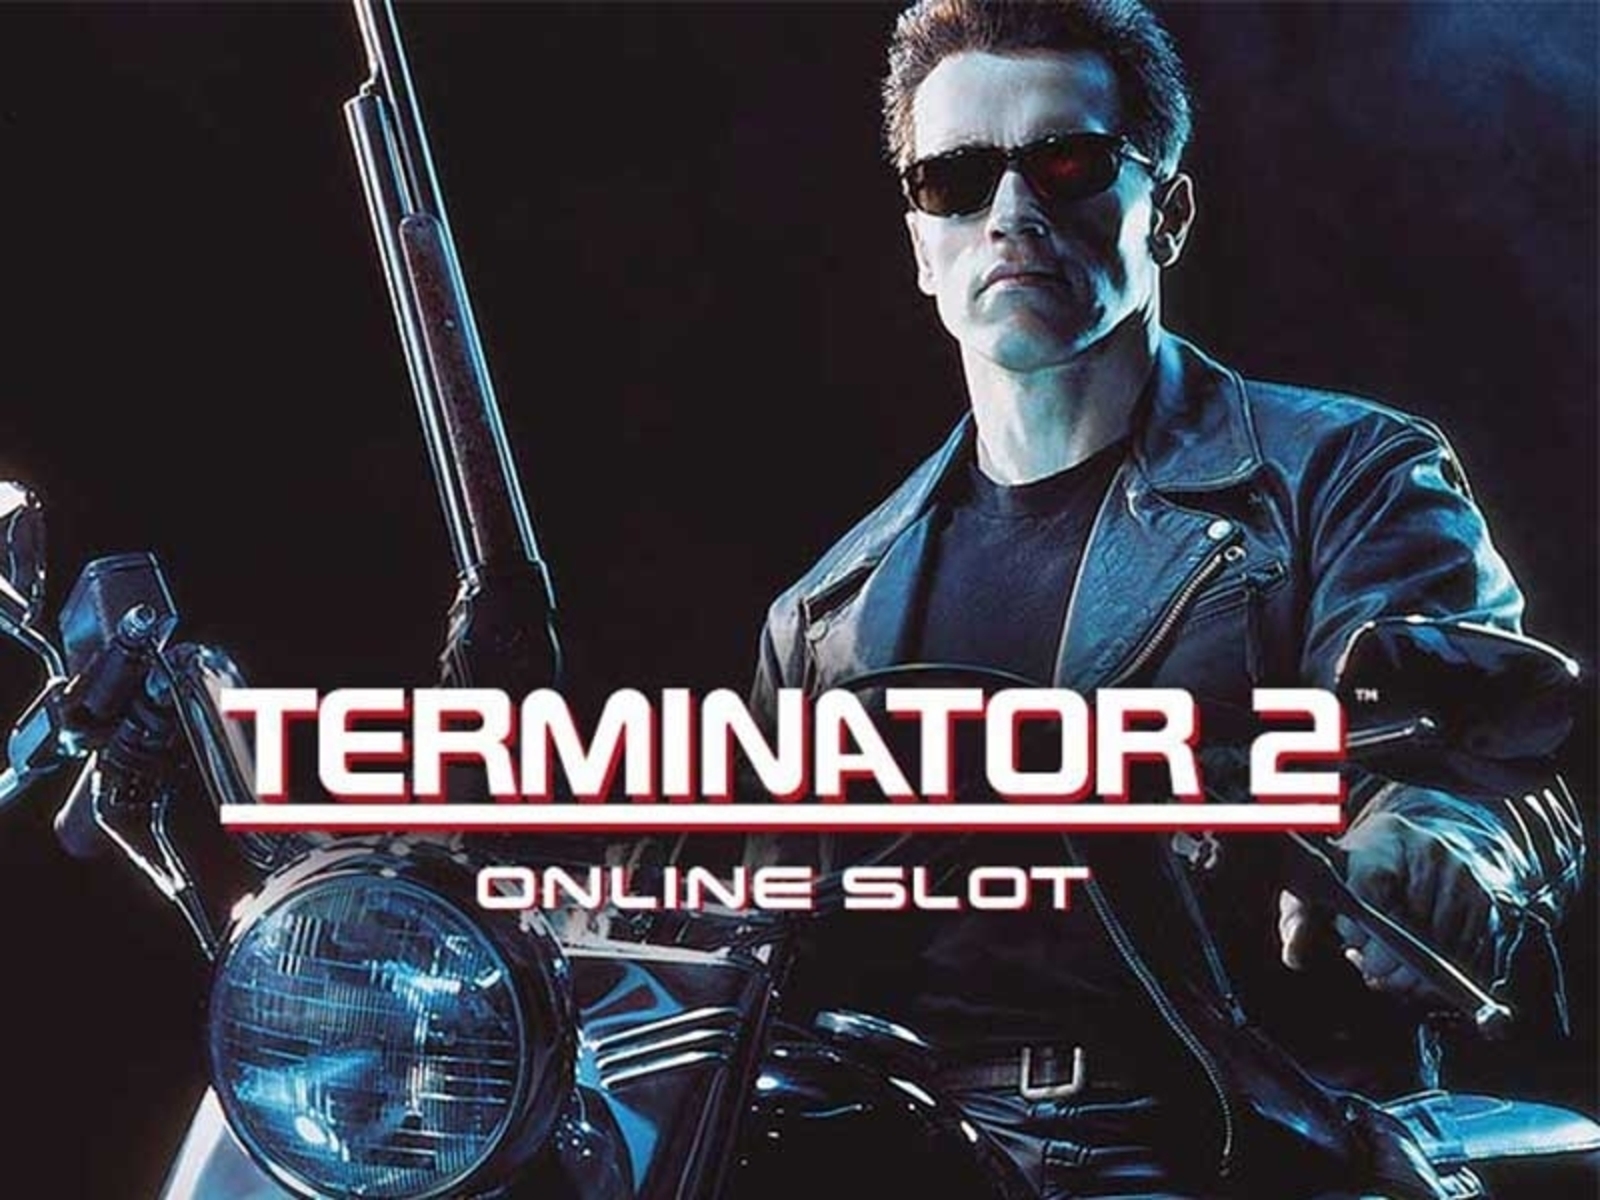 The Terminator 2 Online Slot Demo Game by Microgaming